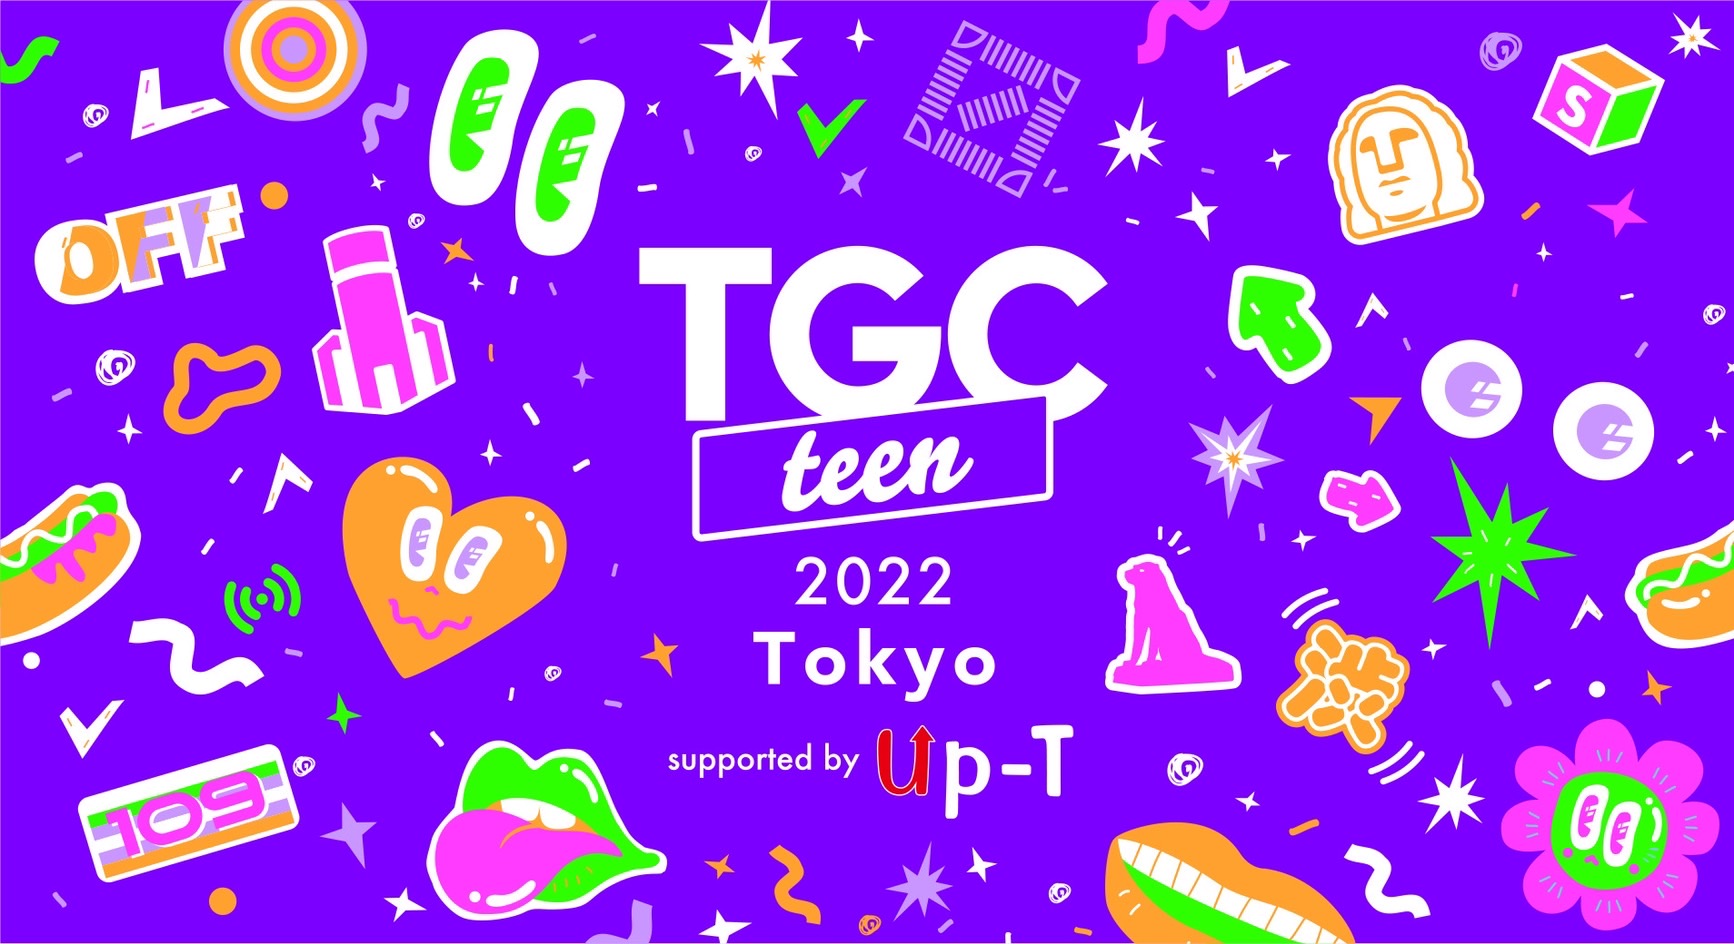 S__727302206 SIW連携イベント『TGC teen 2022 Tokyo supported by Up-T』開催決定